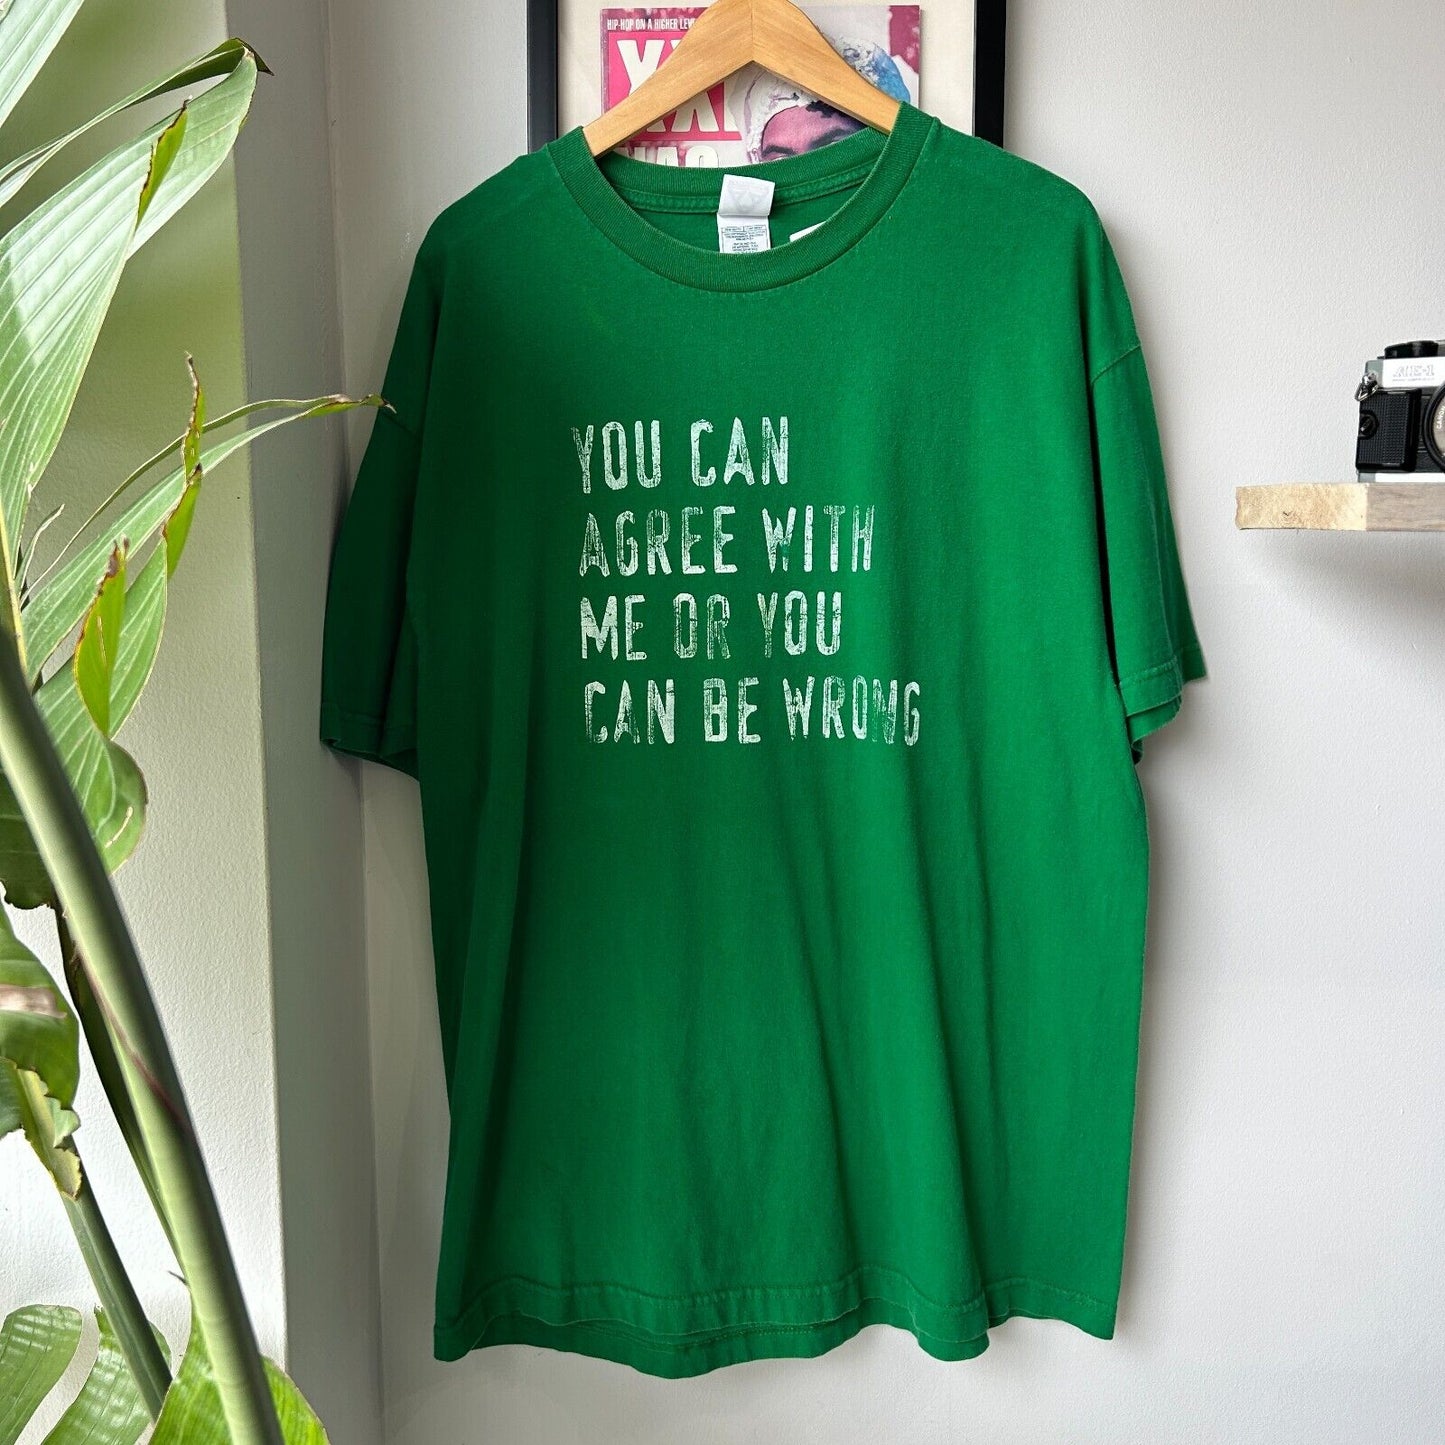 VINTAGE | You Can Agree With Me Or Be Wrong Green T-Shirt sz XL Adult